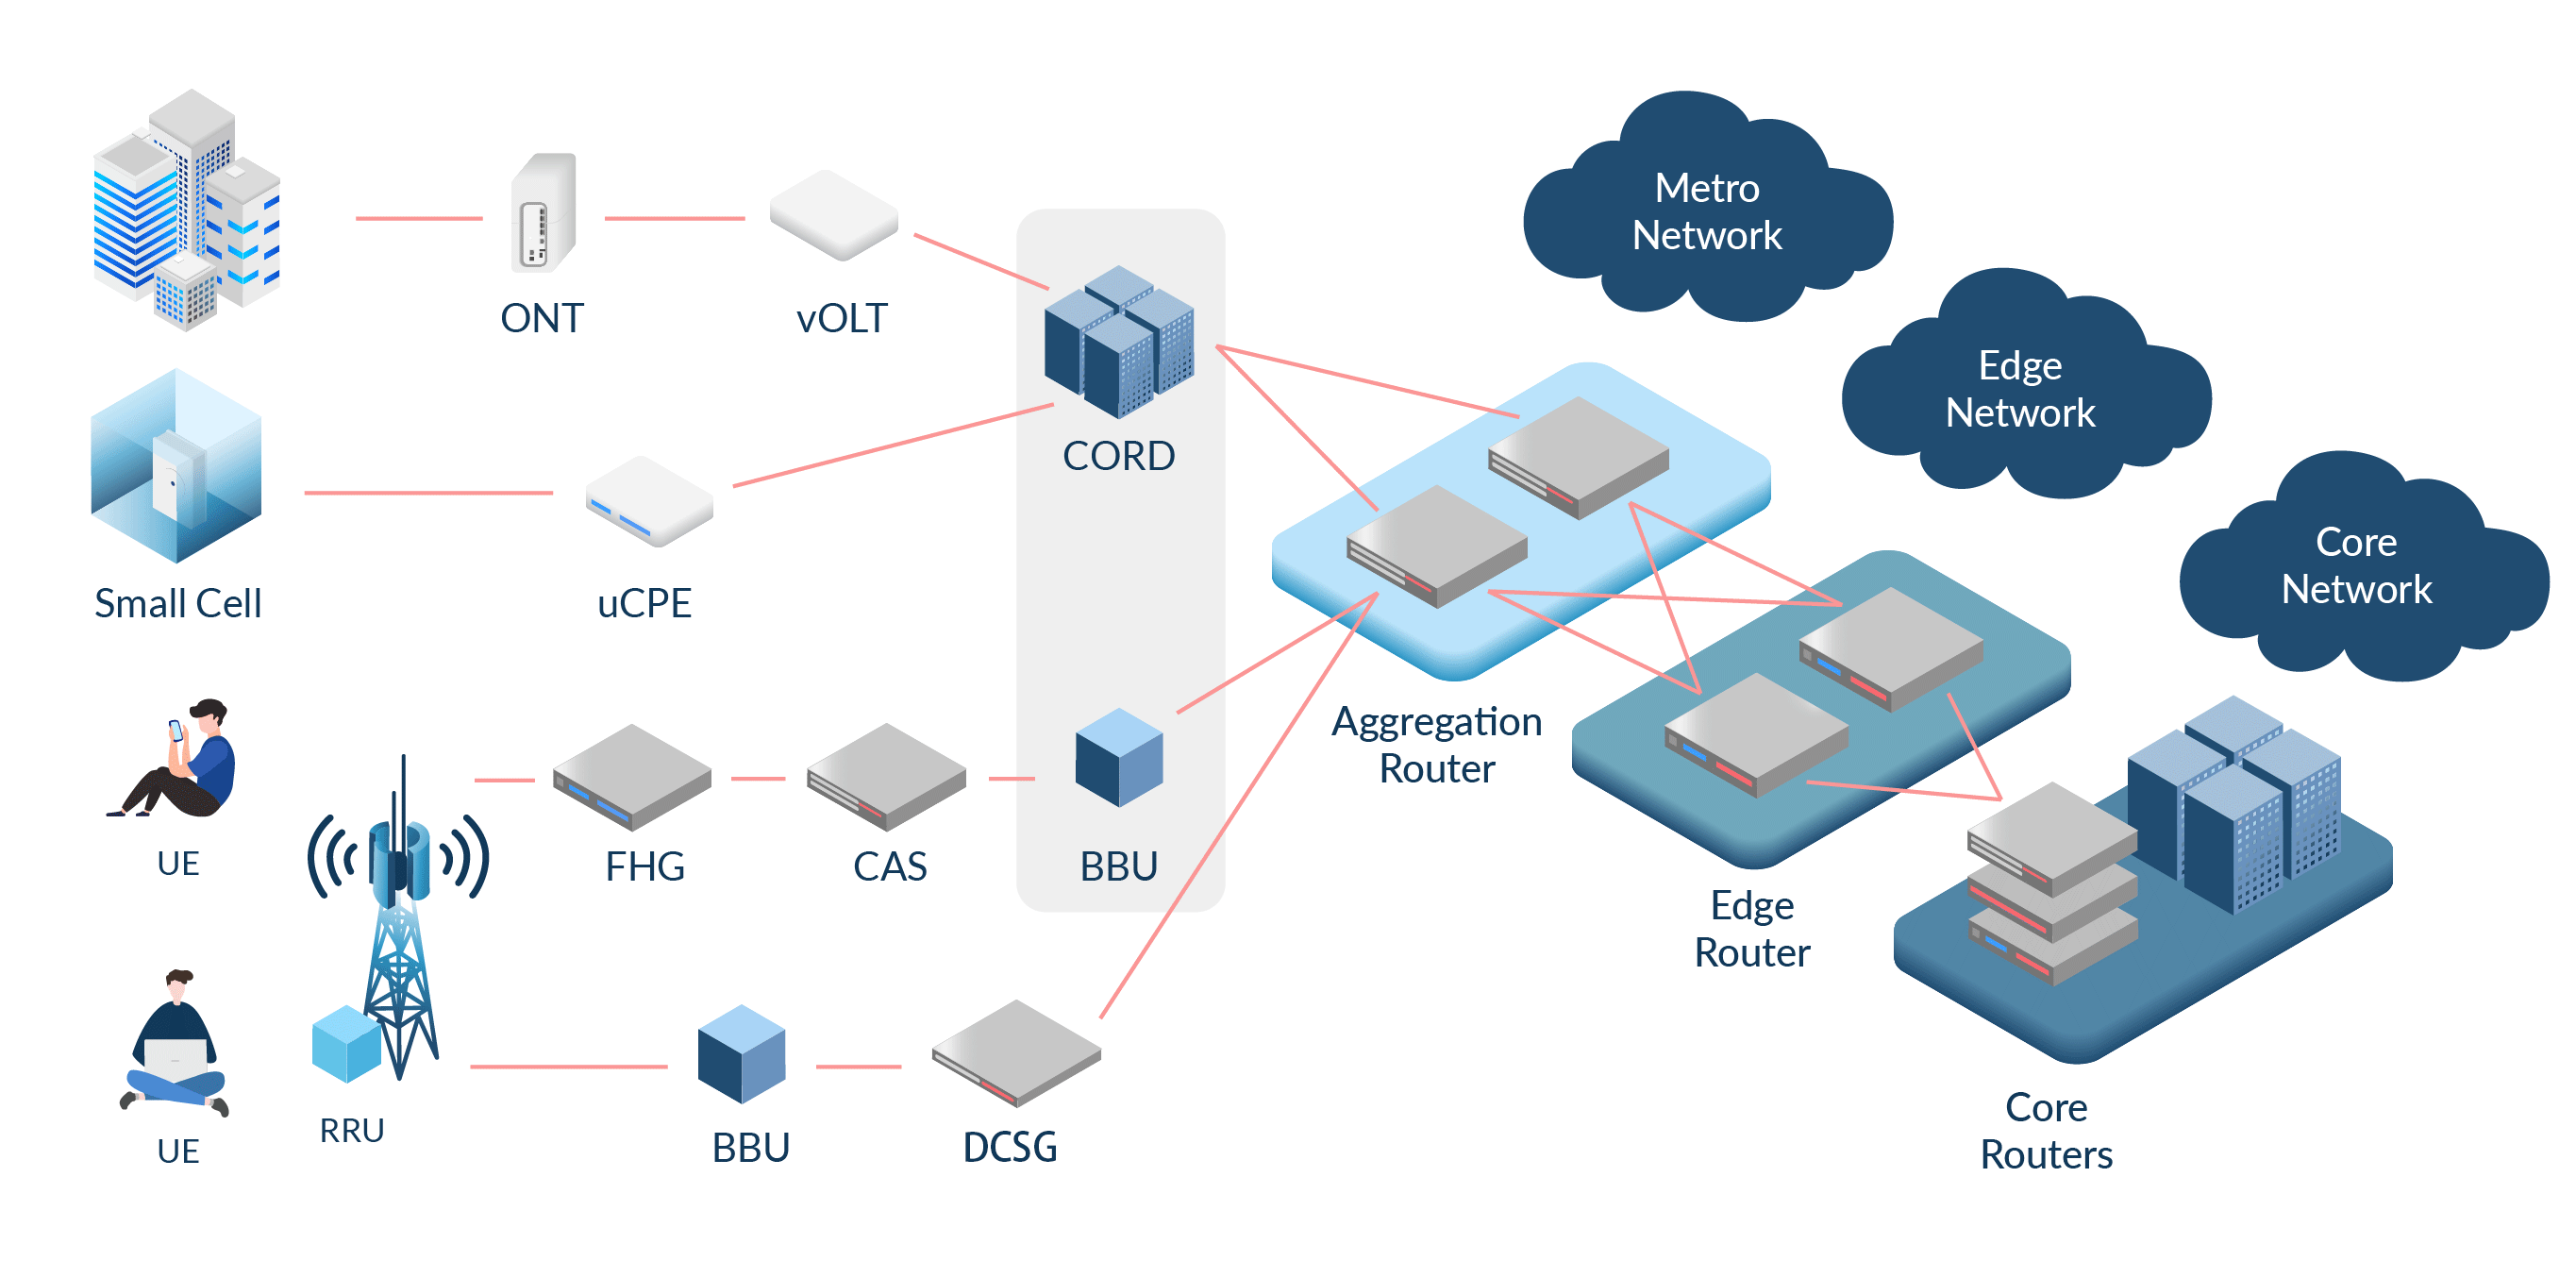 disaggregated cell site gateway and open networking solutions provider